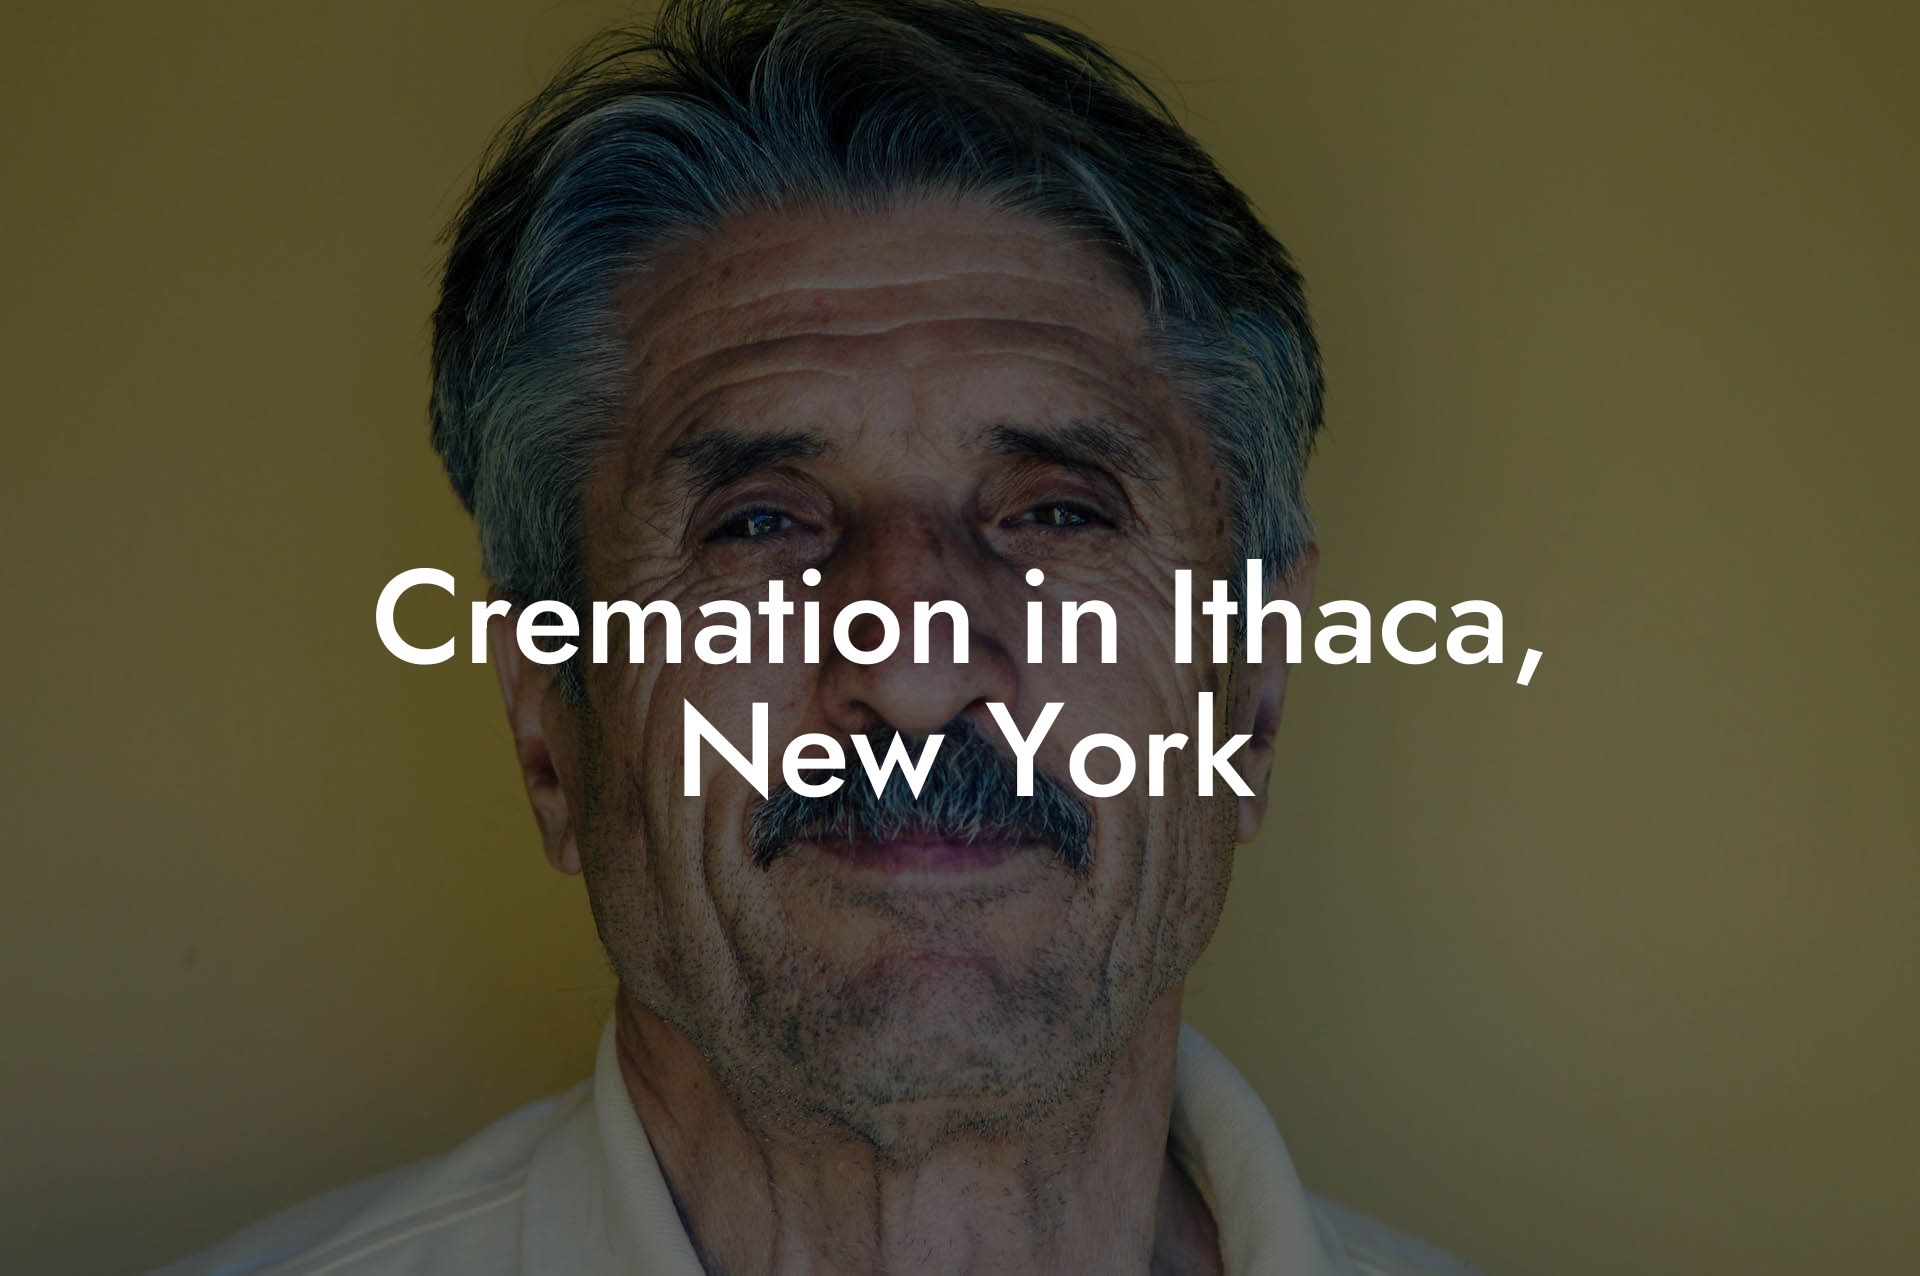 Cremation in Ithaca, New York